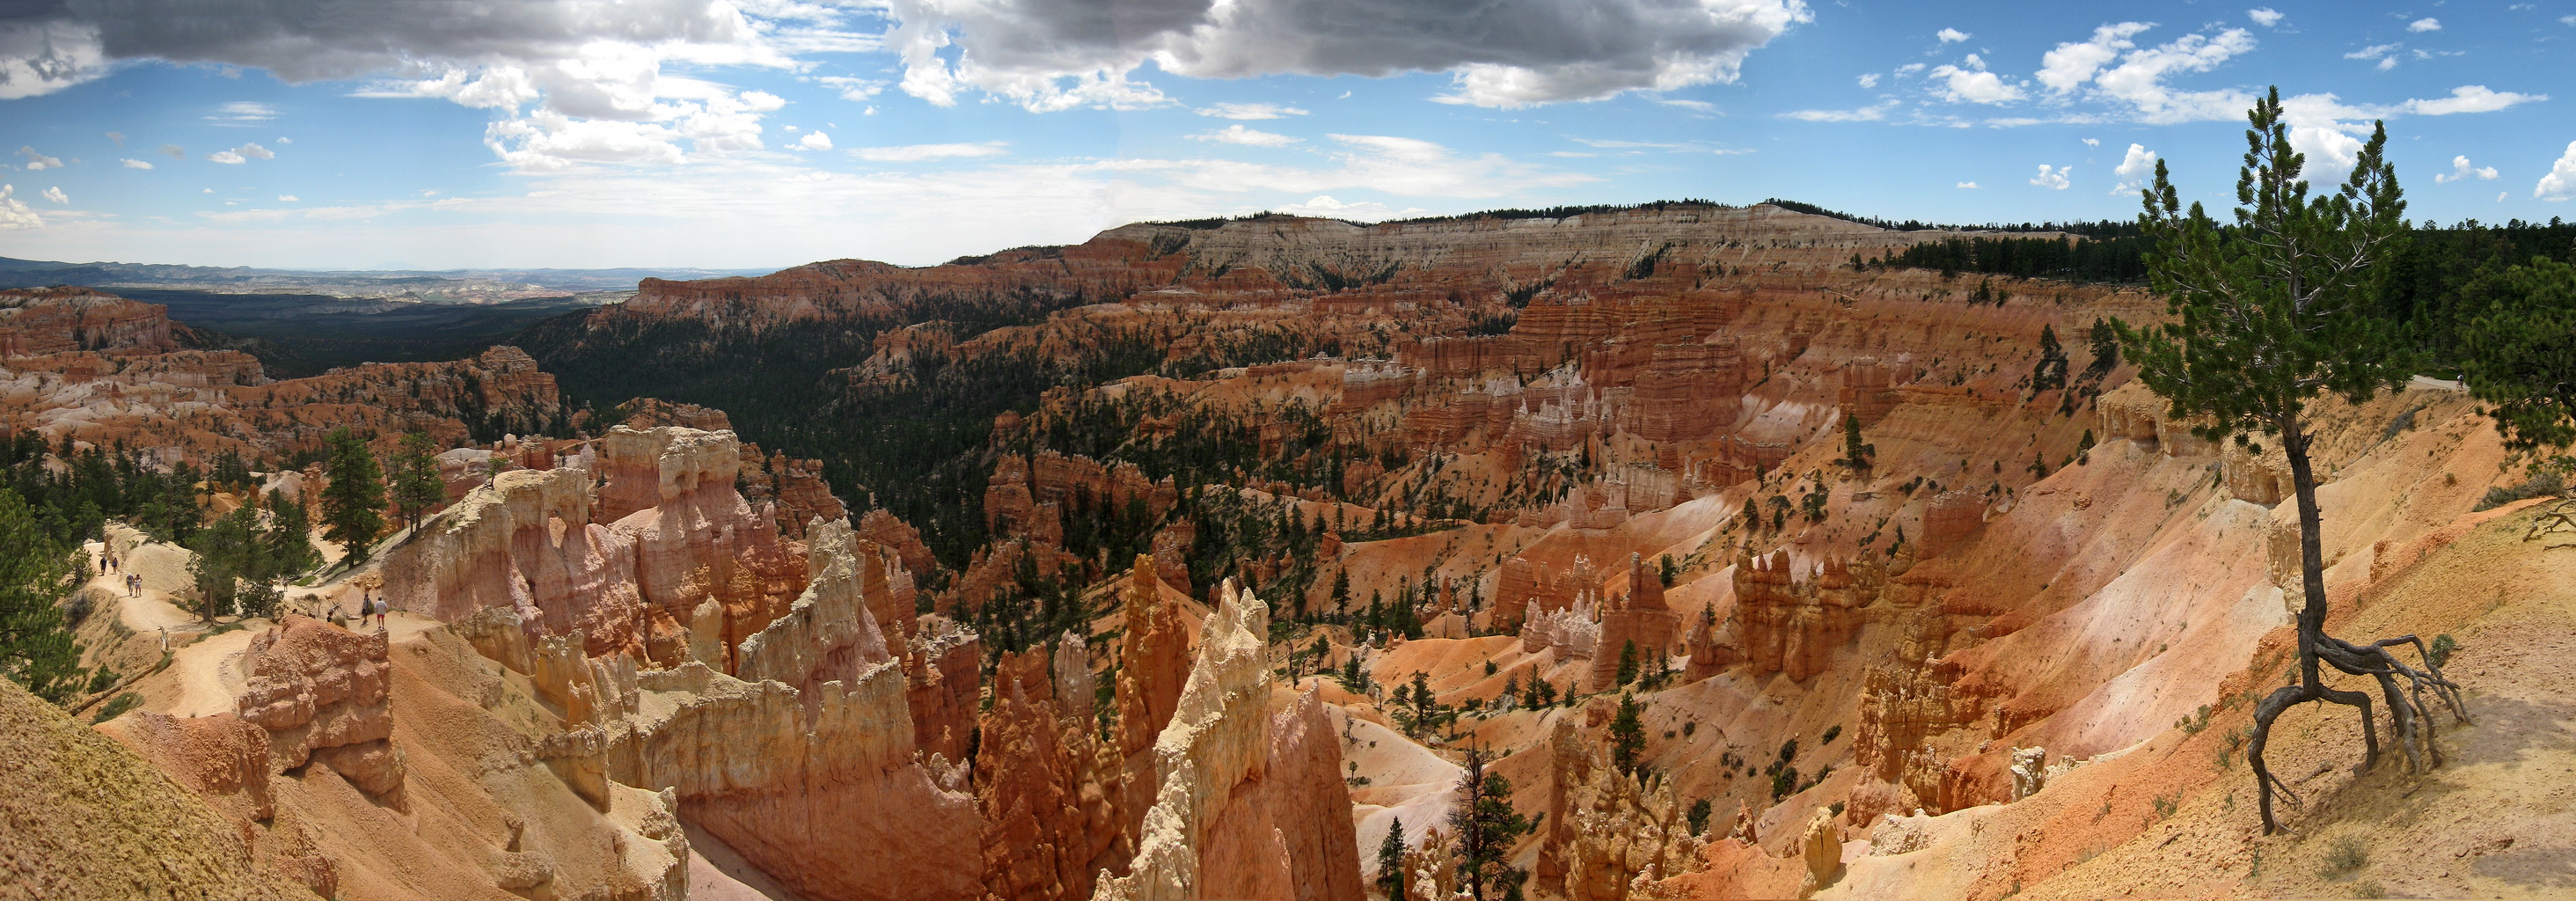 Earth Bryce Canyon National Park 2928x1024